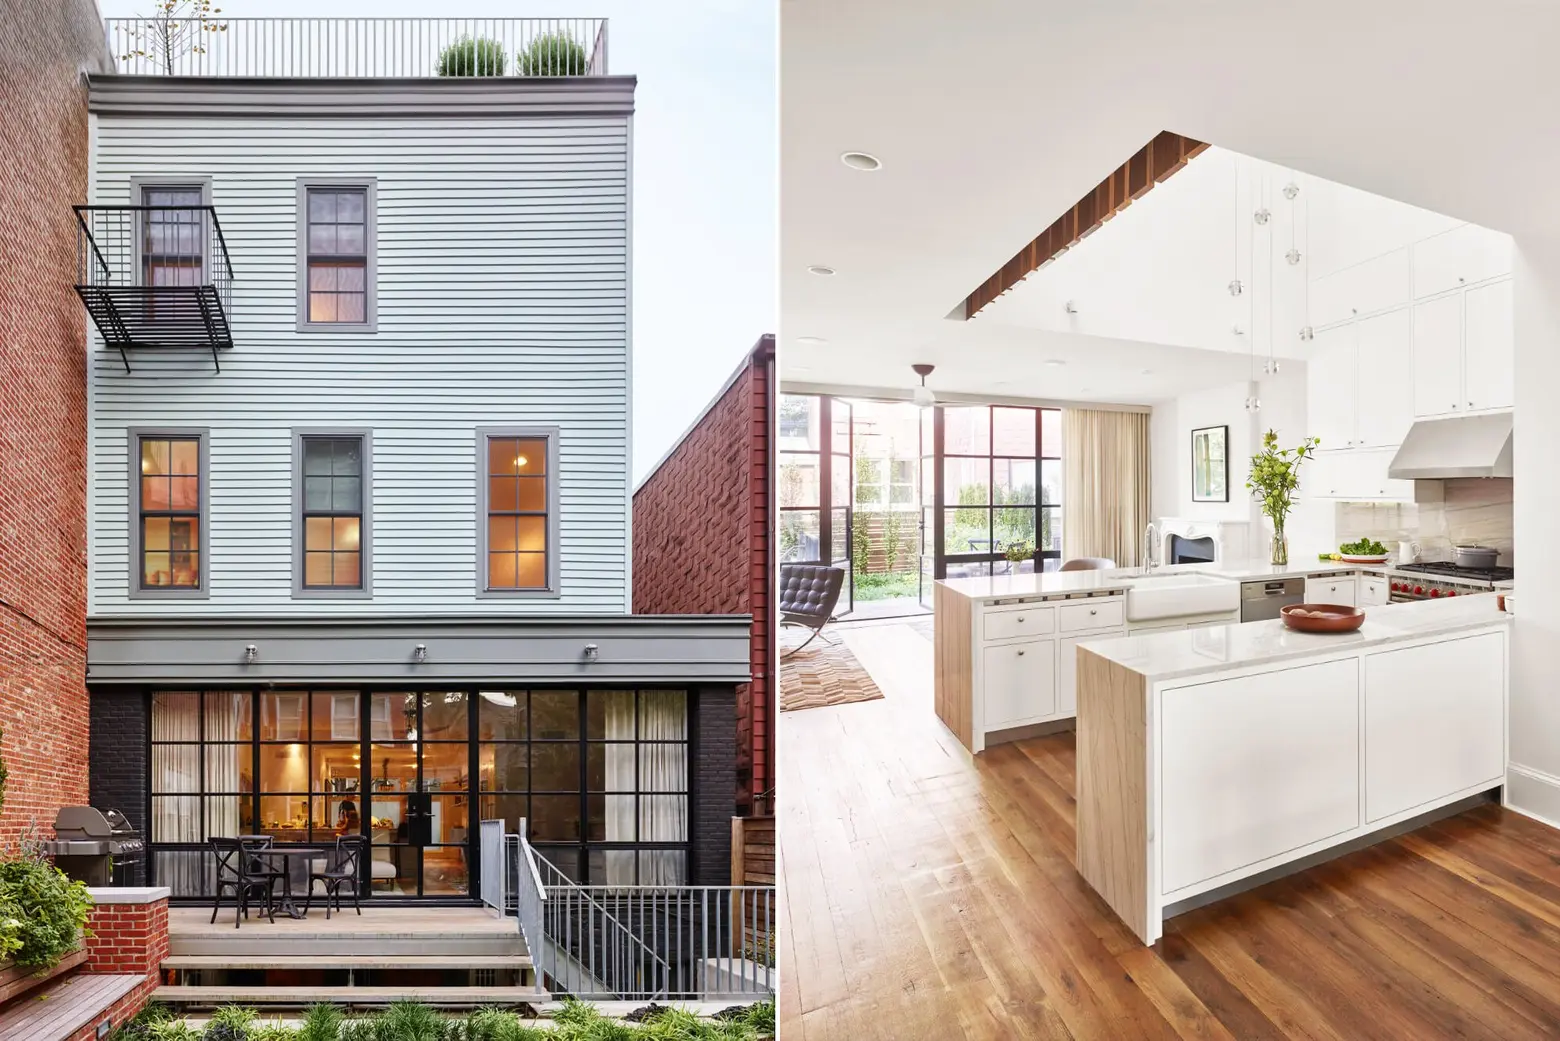 Greenpoint row house features two-story kitchen and bone-dry wine cellar